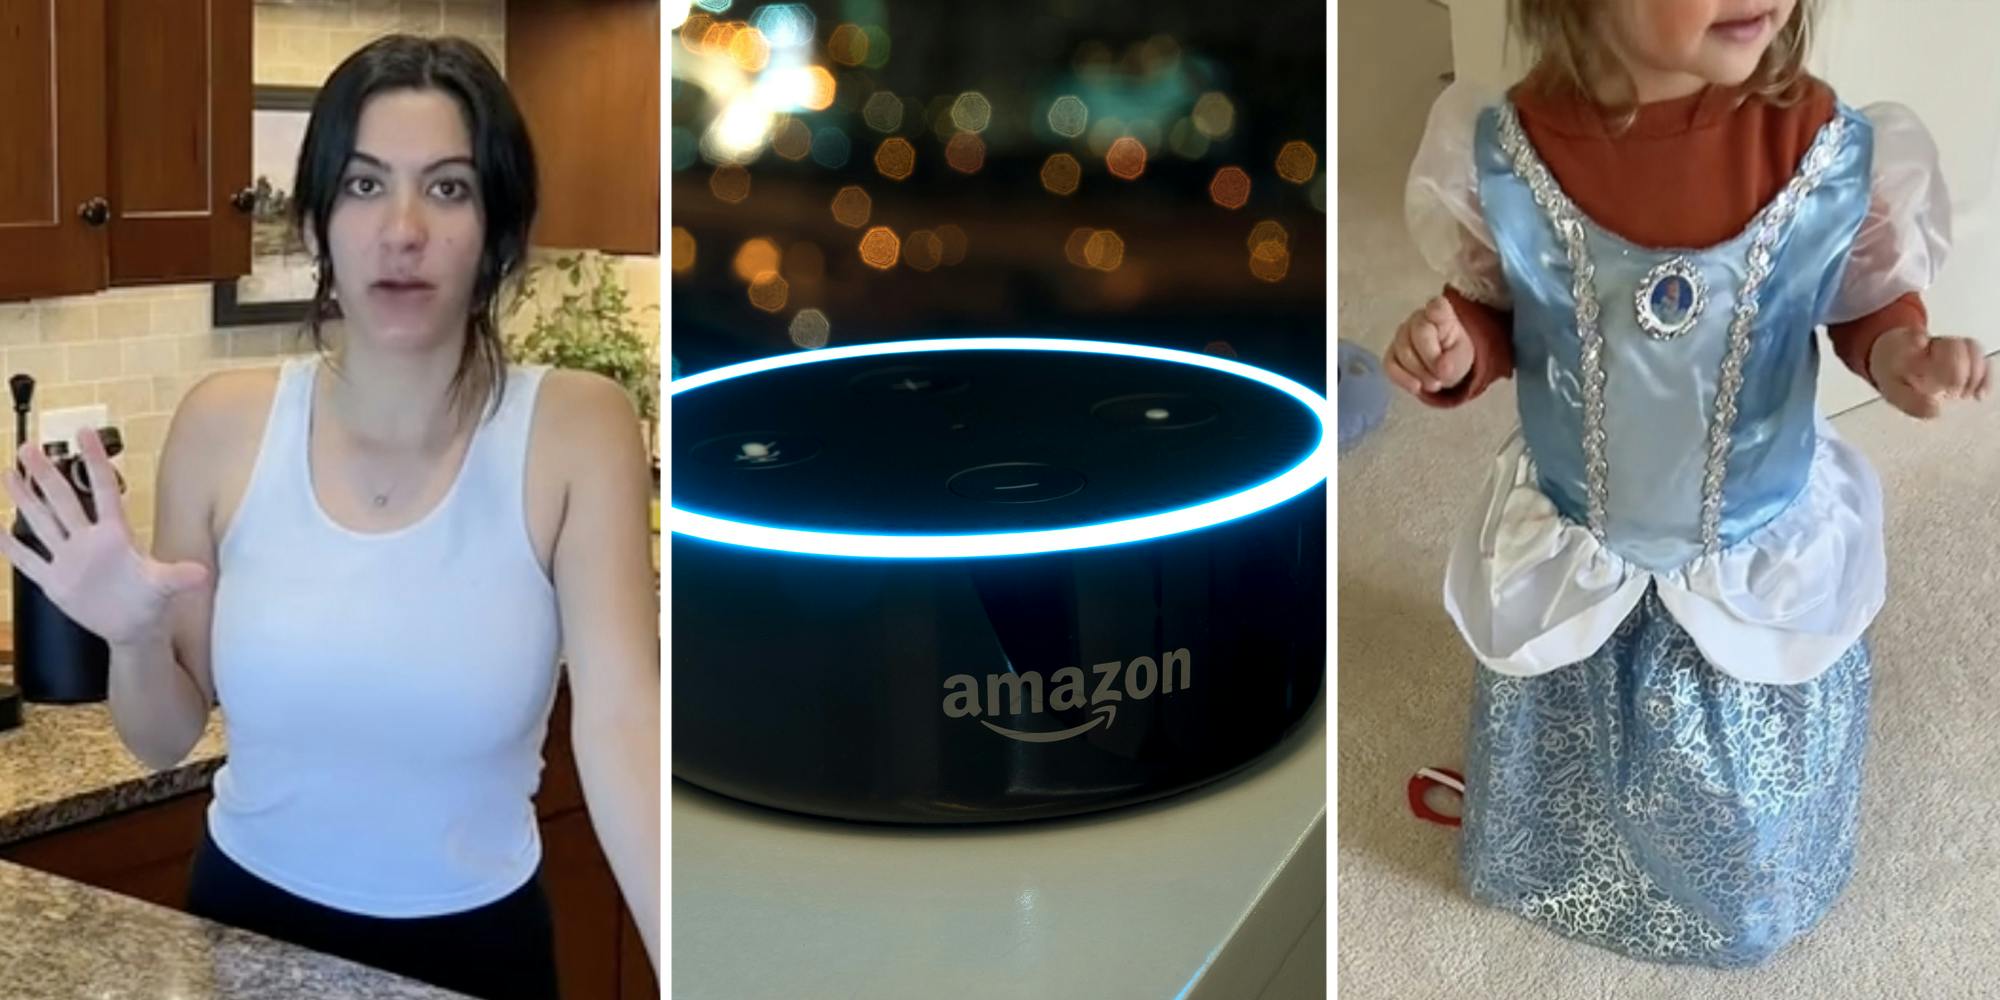 ‘You wrong’: Mom lets 2-year-old in Cinderella dress use Amazon Alexa. It backfires